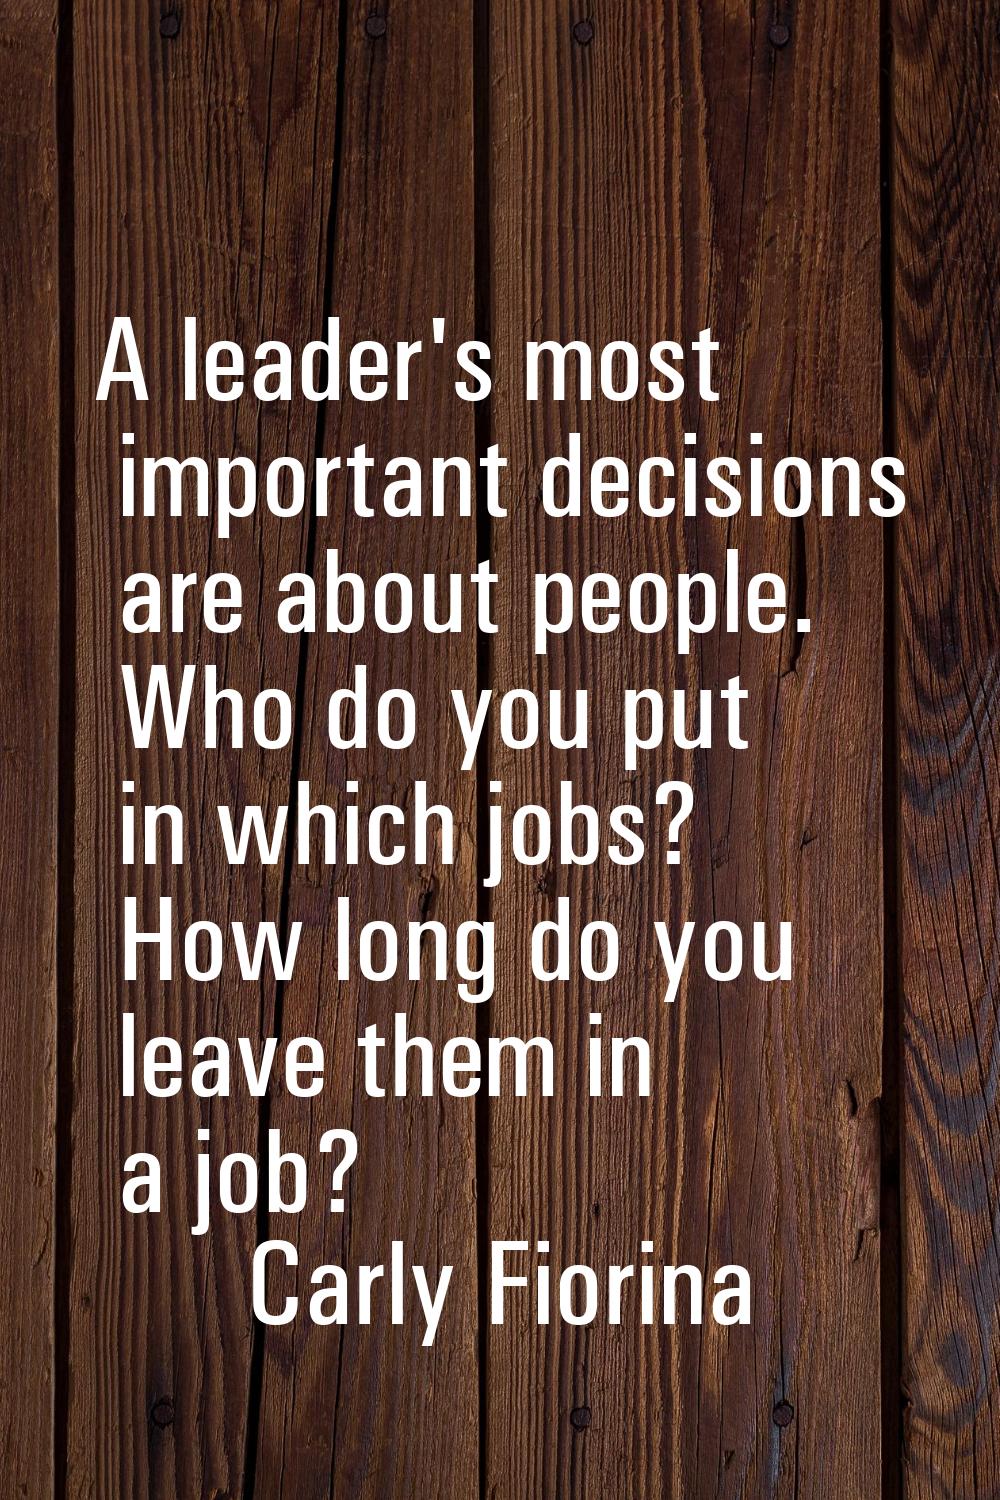 A leader's most important decisions are about people. Who do you put in which jobs? How long do you